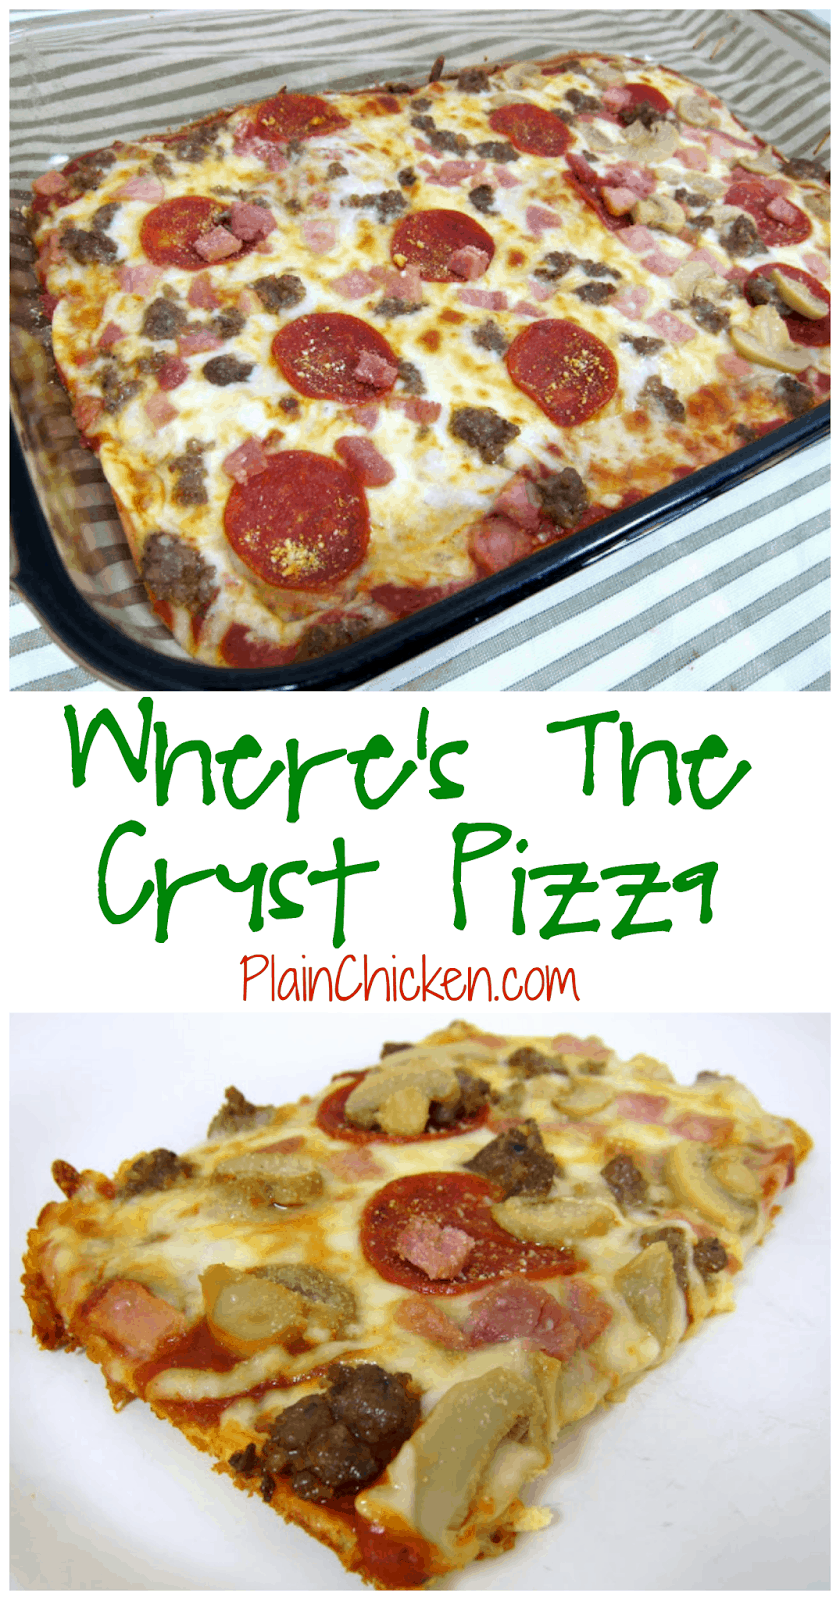 Where's The Crust Pizza - pizza crust made with cream cheese, eggs, garlic and parmesan cheese - no gluten! Top with favorite sauce and toppings. SOOOO good! We love to make this for our weekly pizza night!